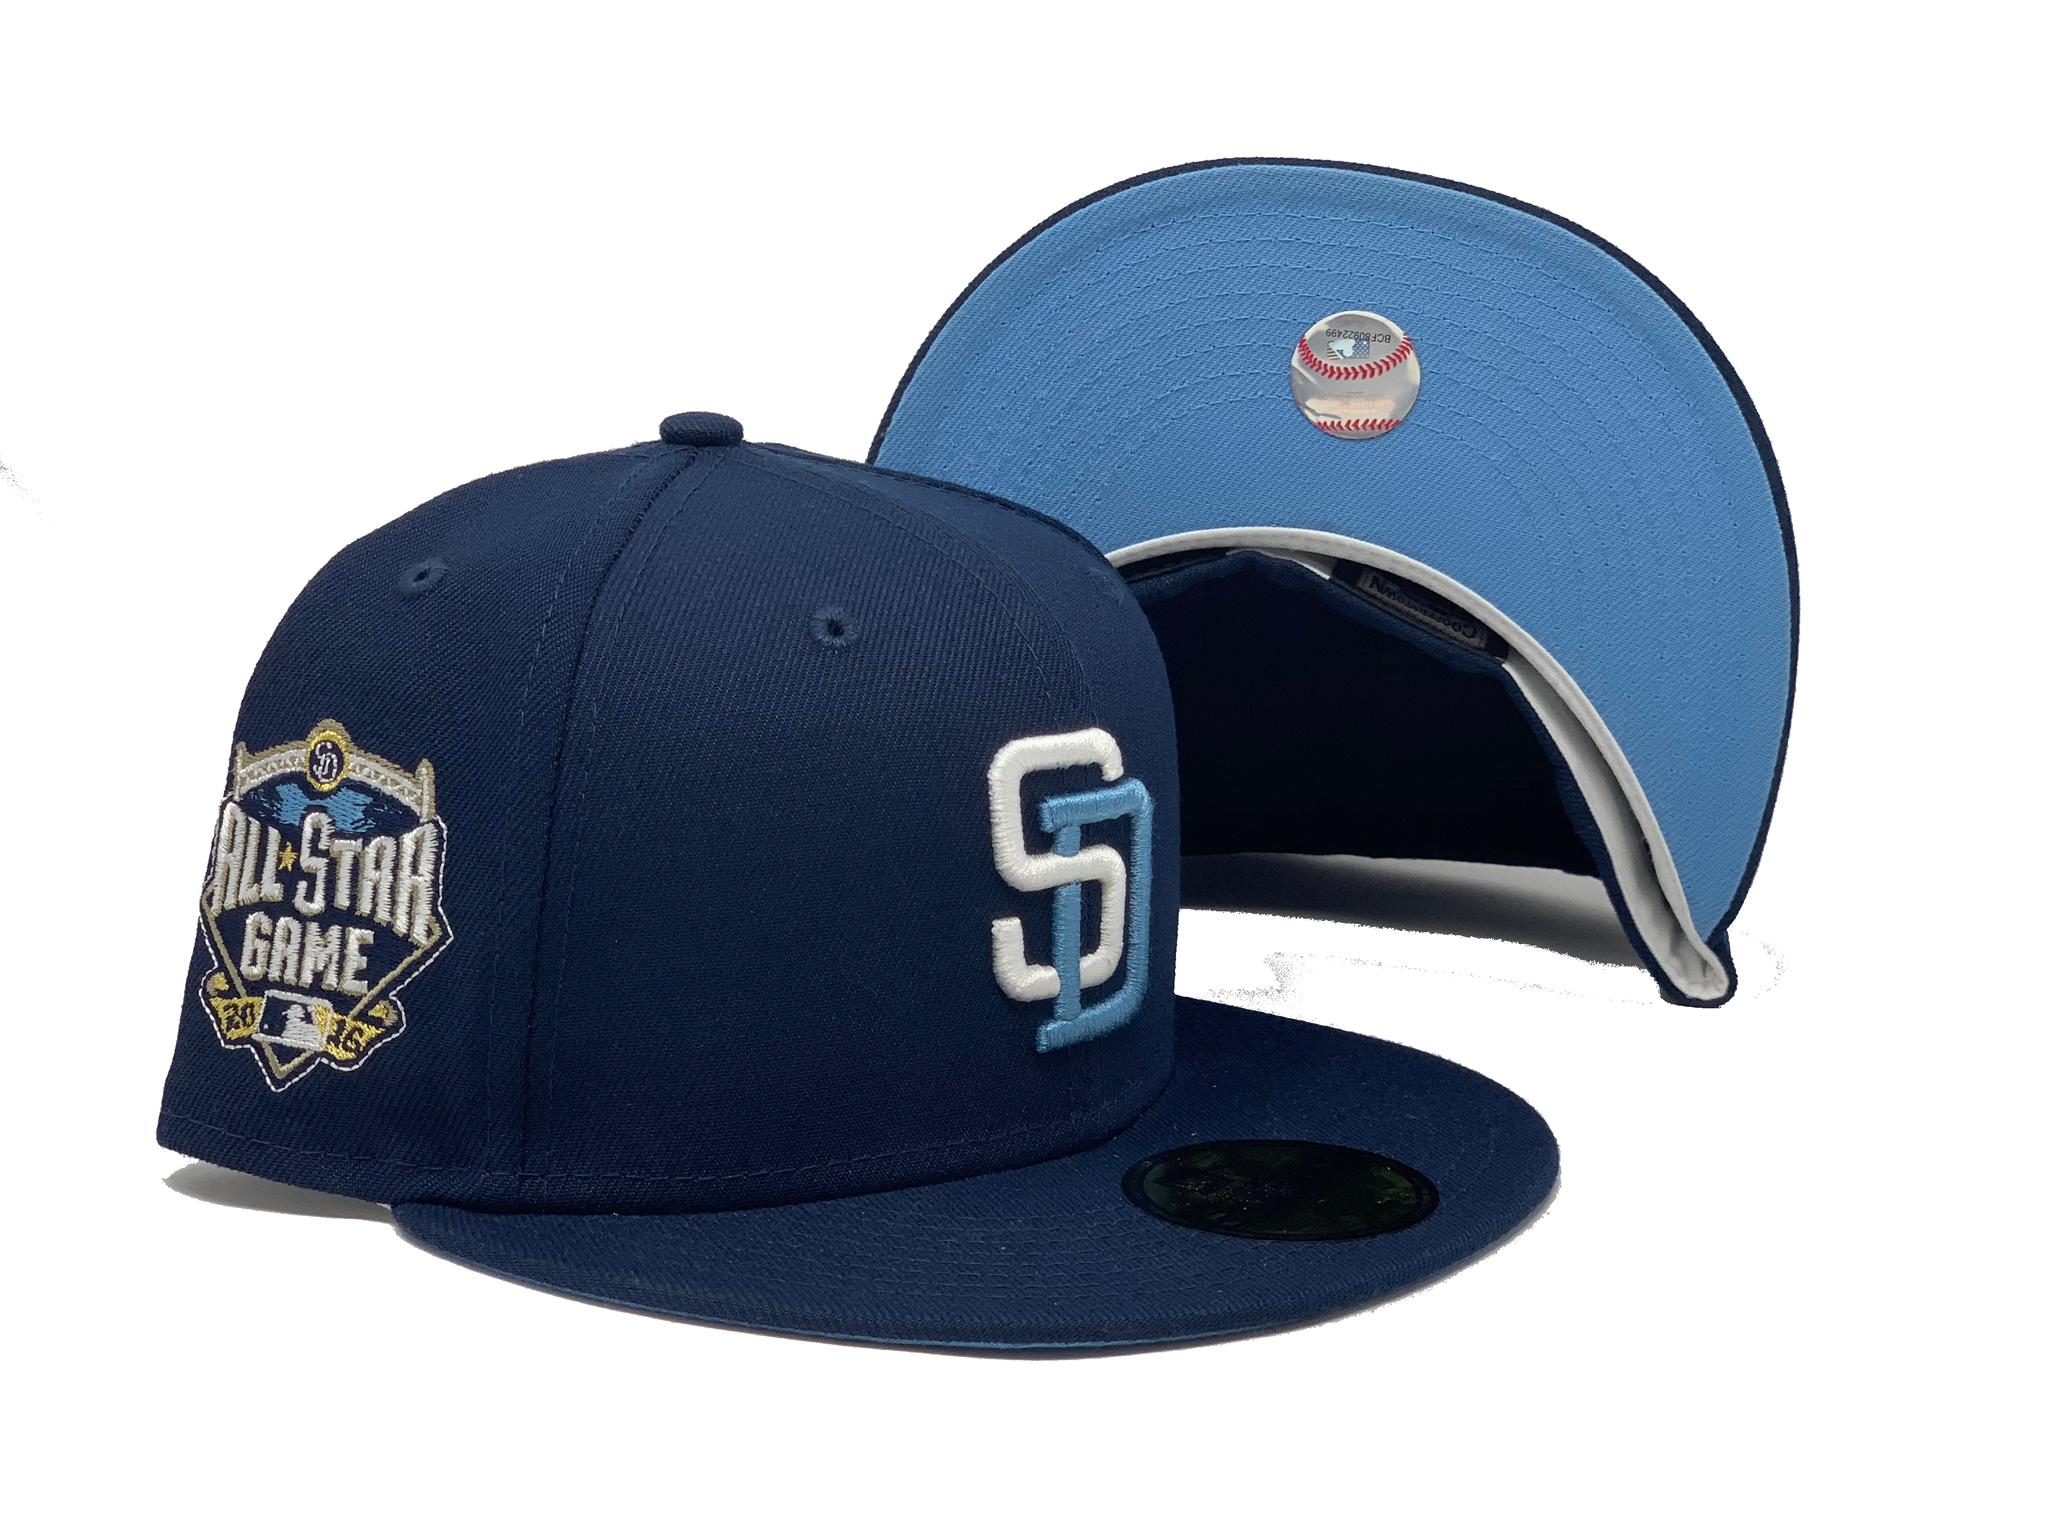 San Diego Padres ORLANTIC-3 Navy-White Fitted Hat by New Era